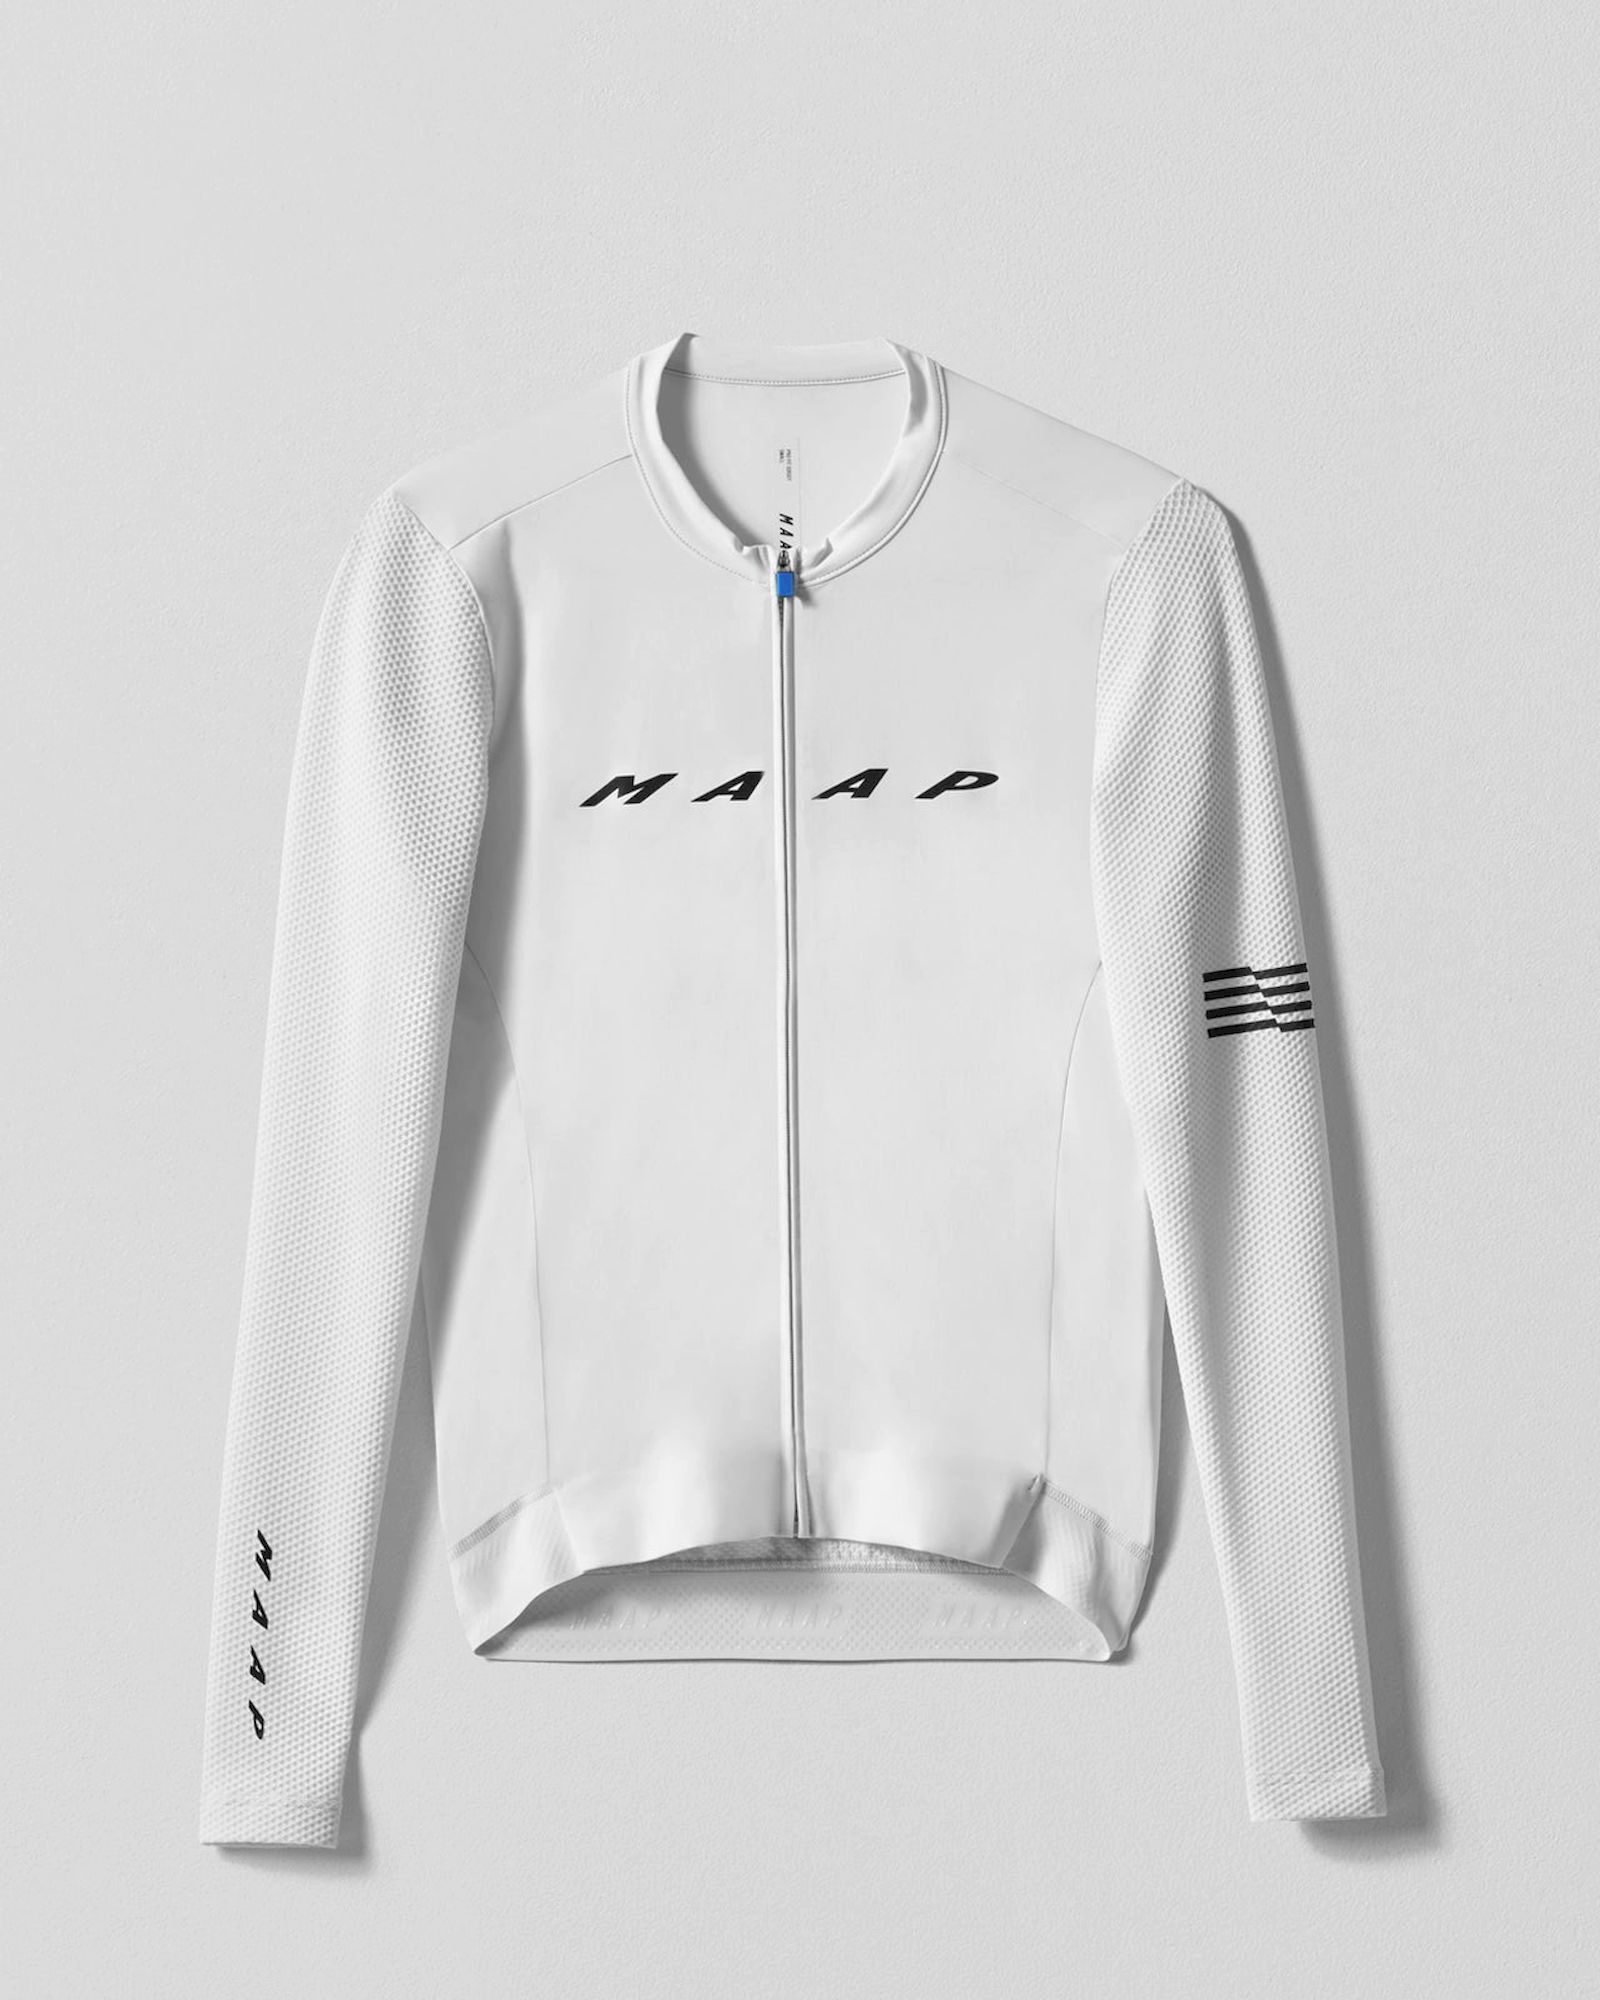 Maap Evade Pro Base LS Jersey 2.0 - Maillot vélo homme | Hardloop